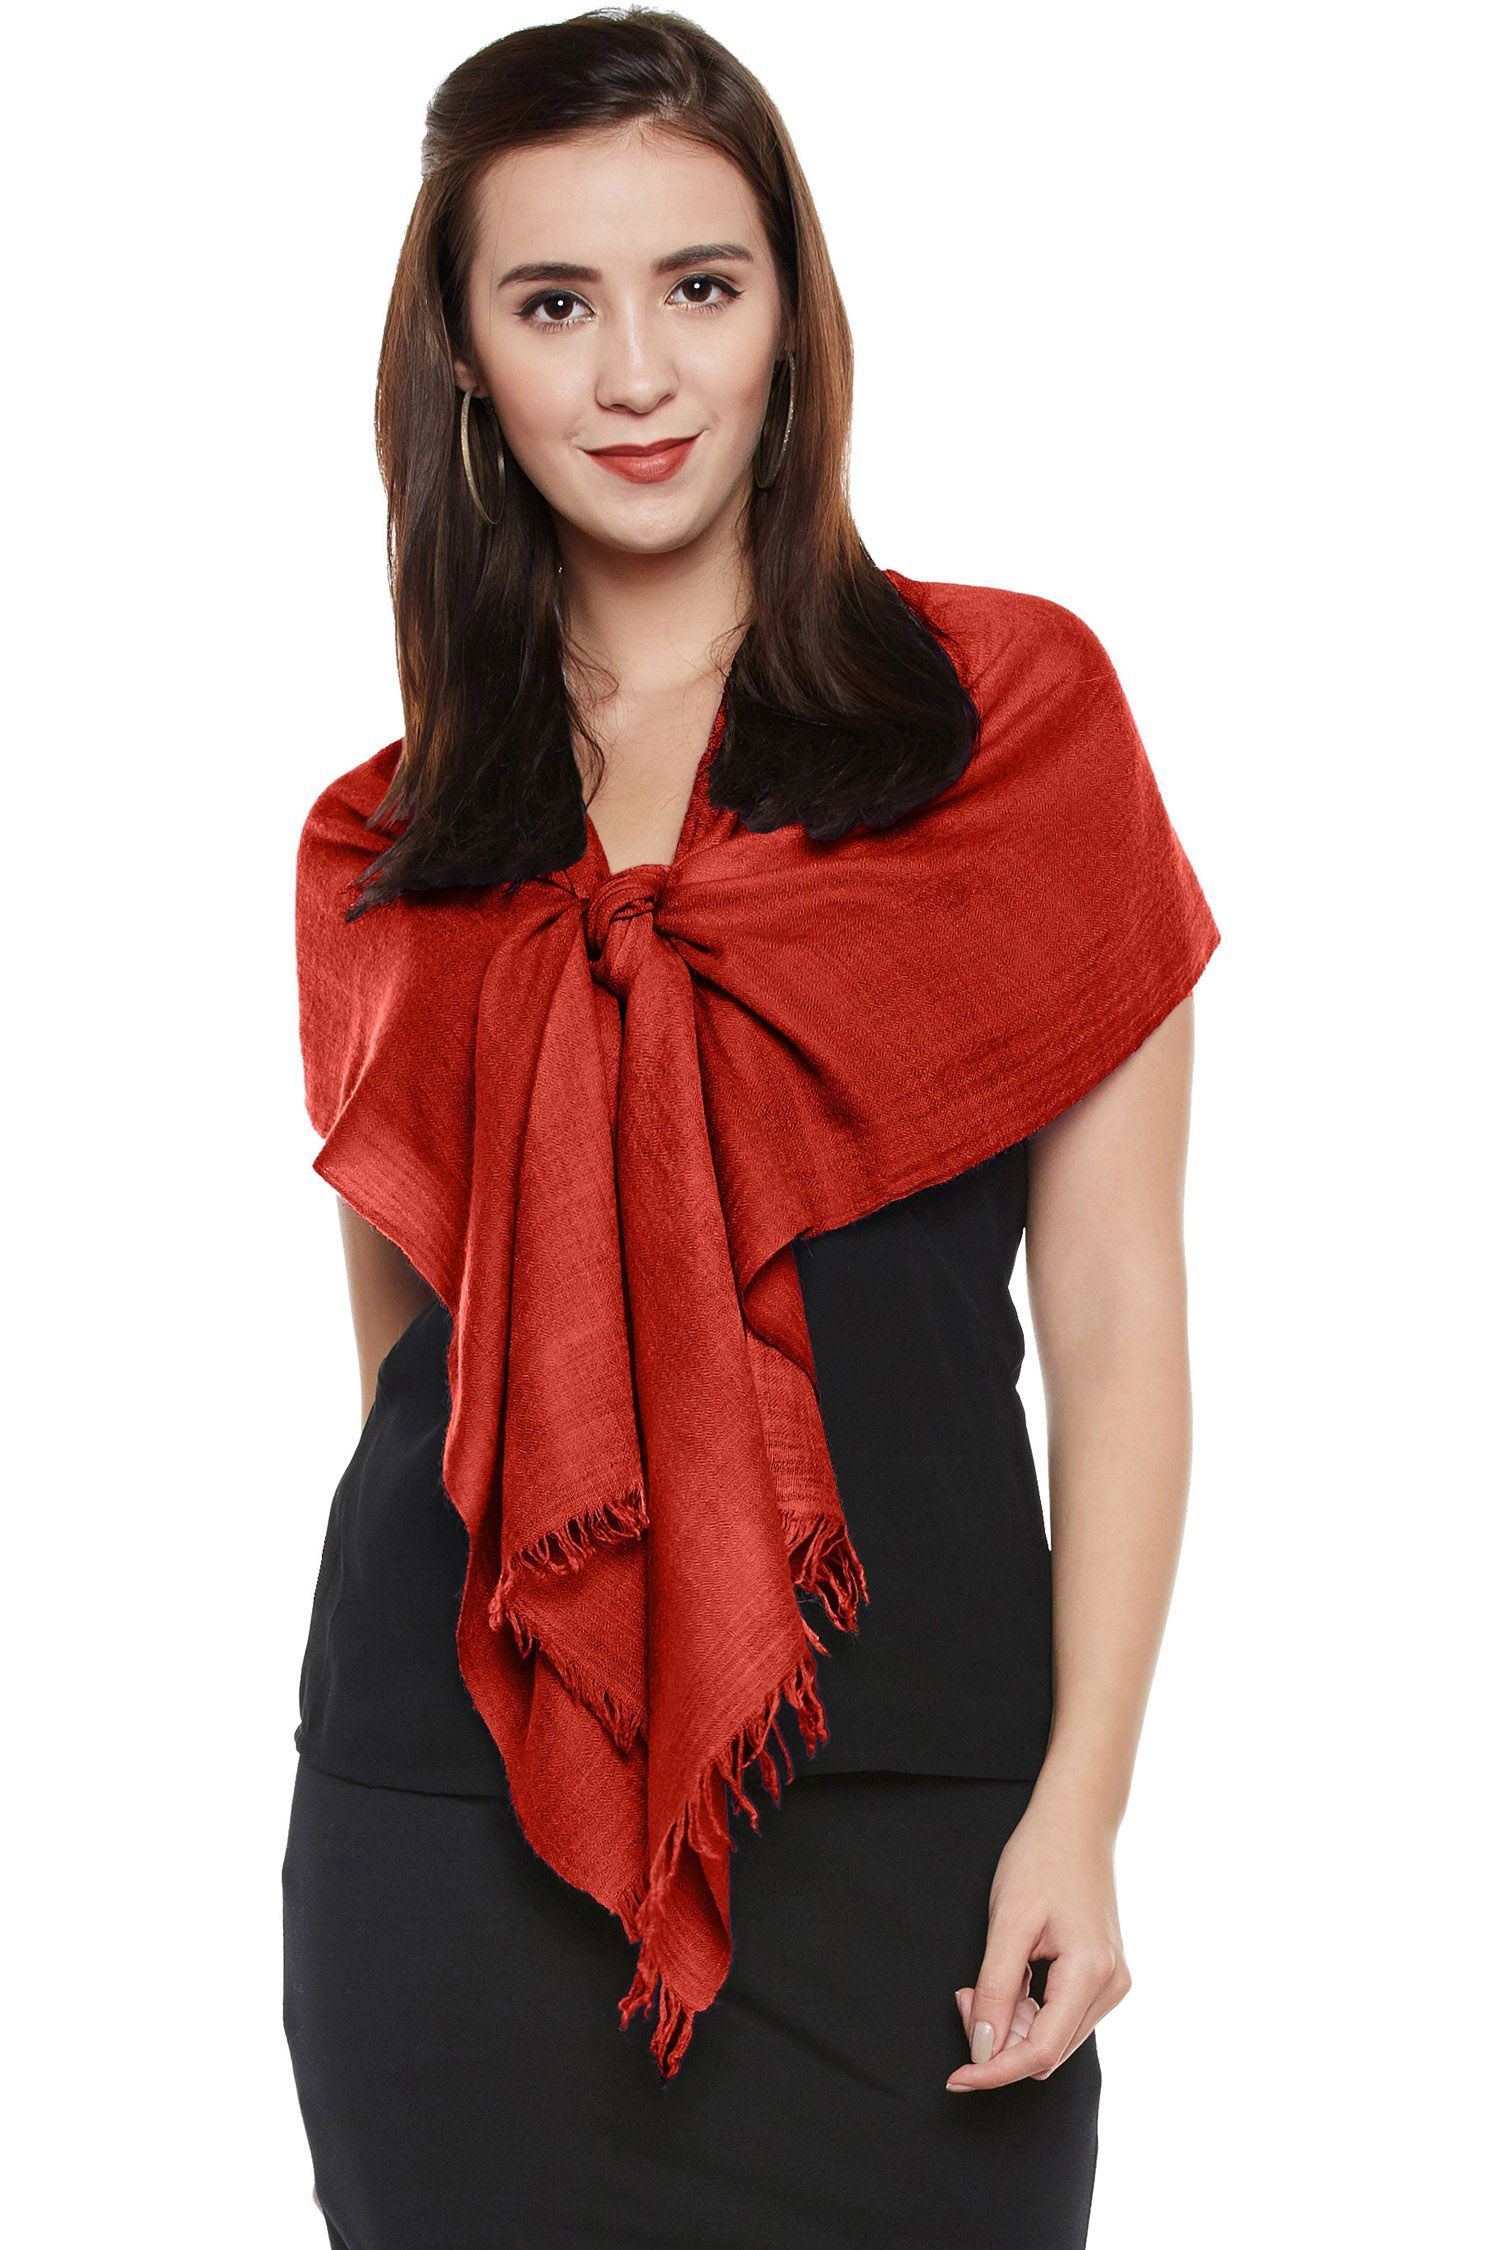 Buy Authentic Red Cashmere Scarf | Pure Pashmina - 100% Cashmere Online